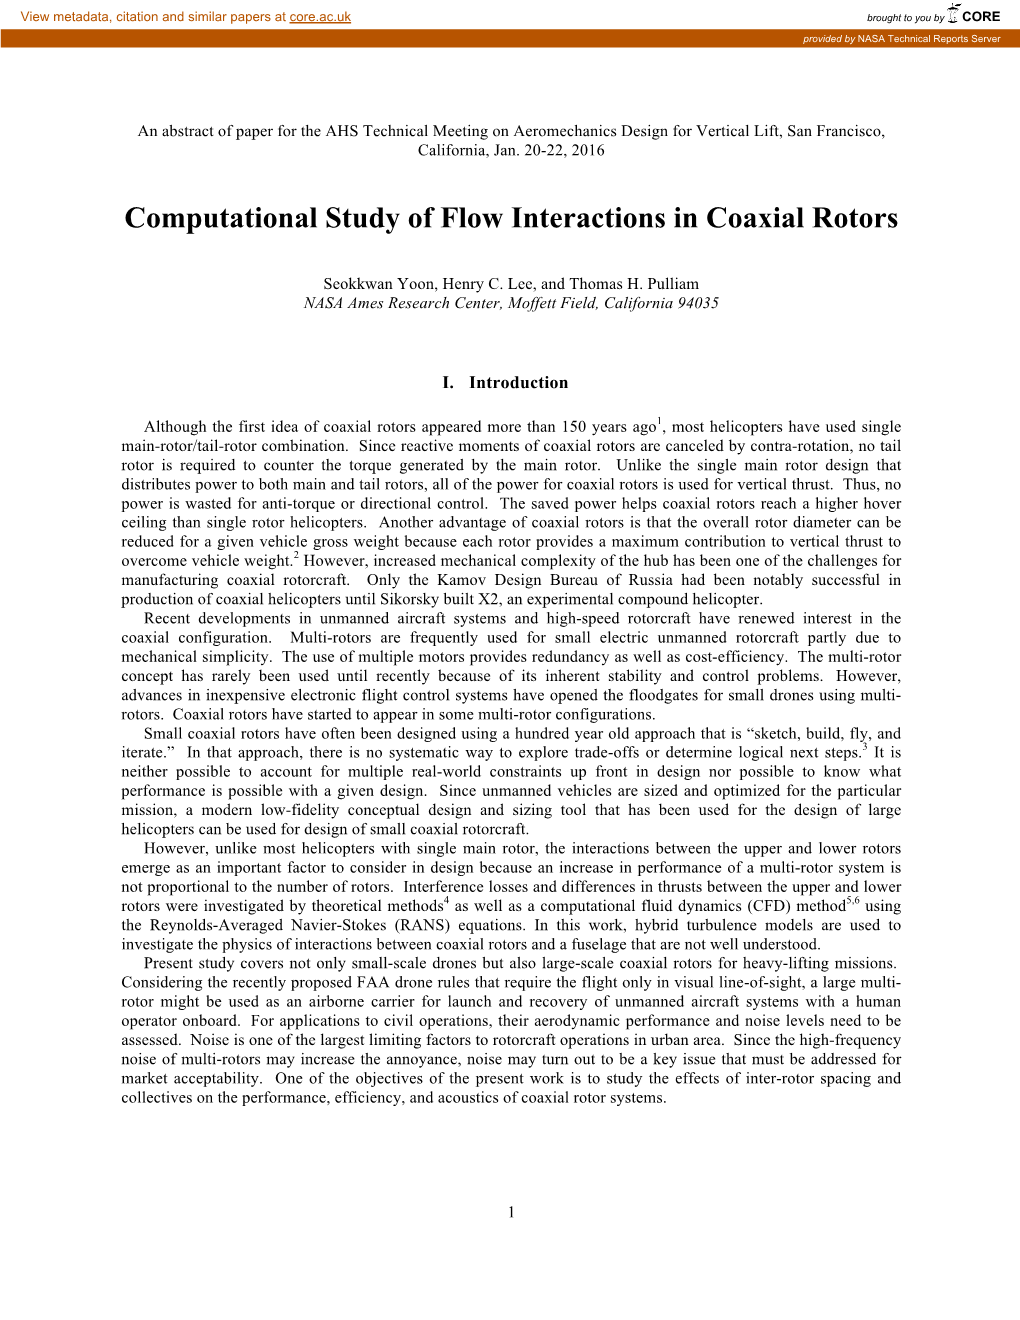 Computational Study of Flow Interactions in Coaxial Rotors